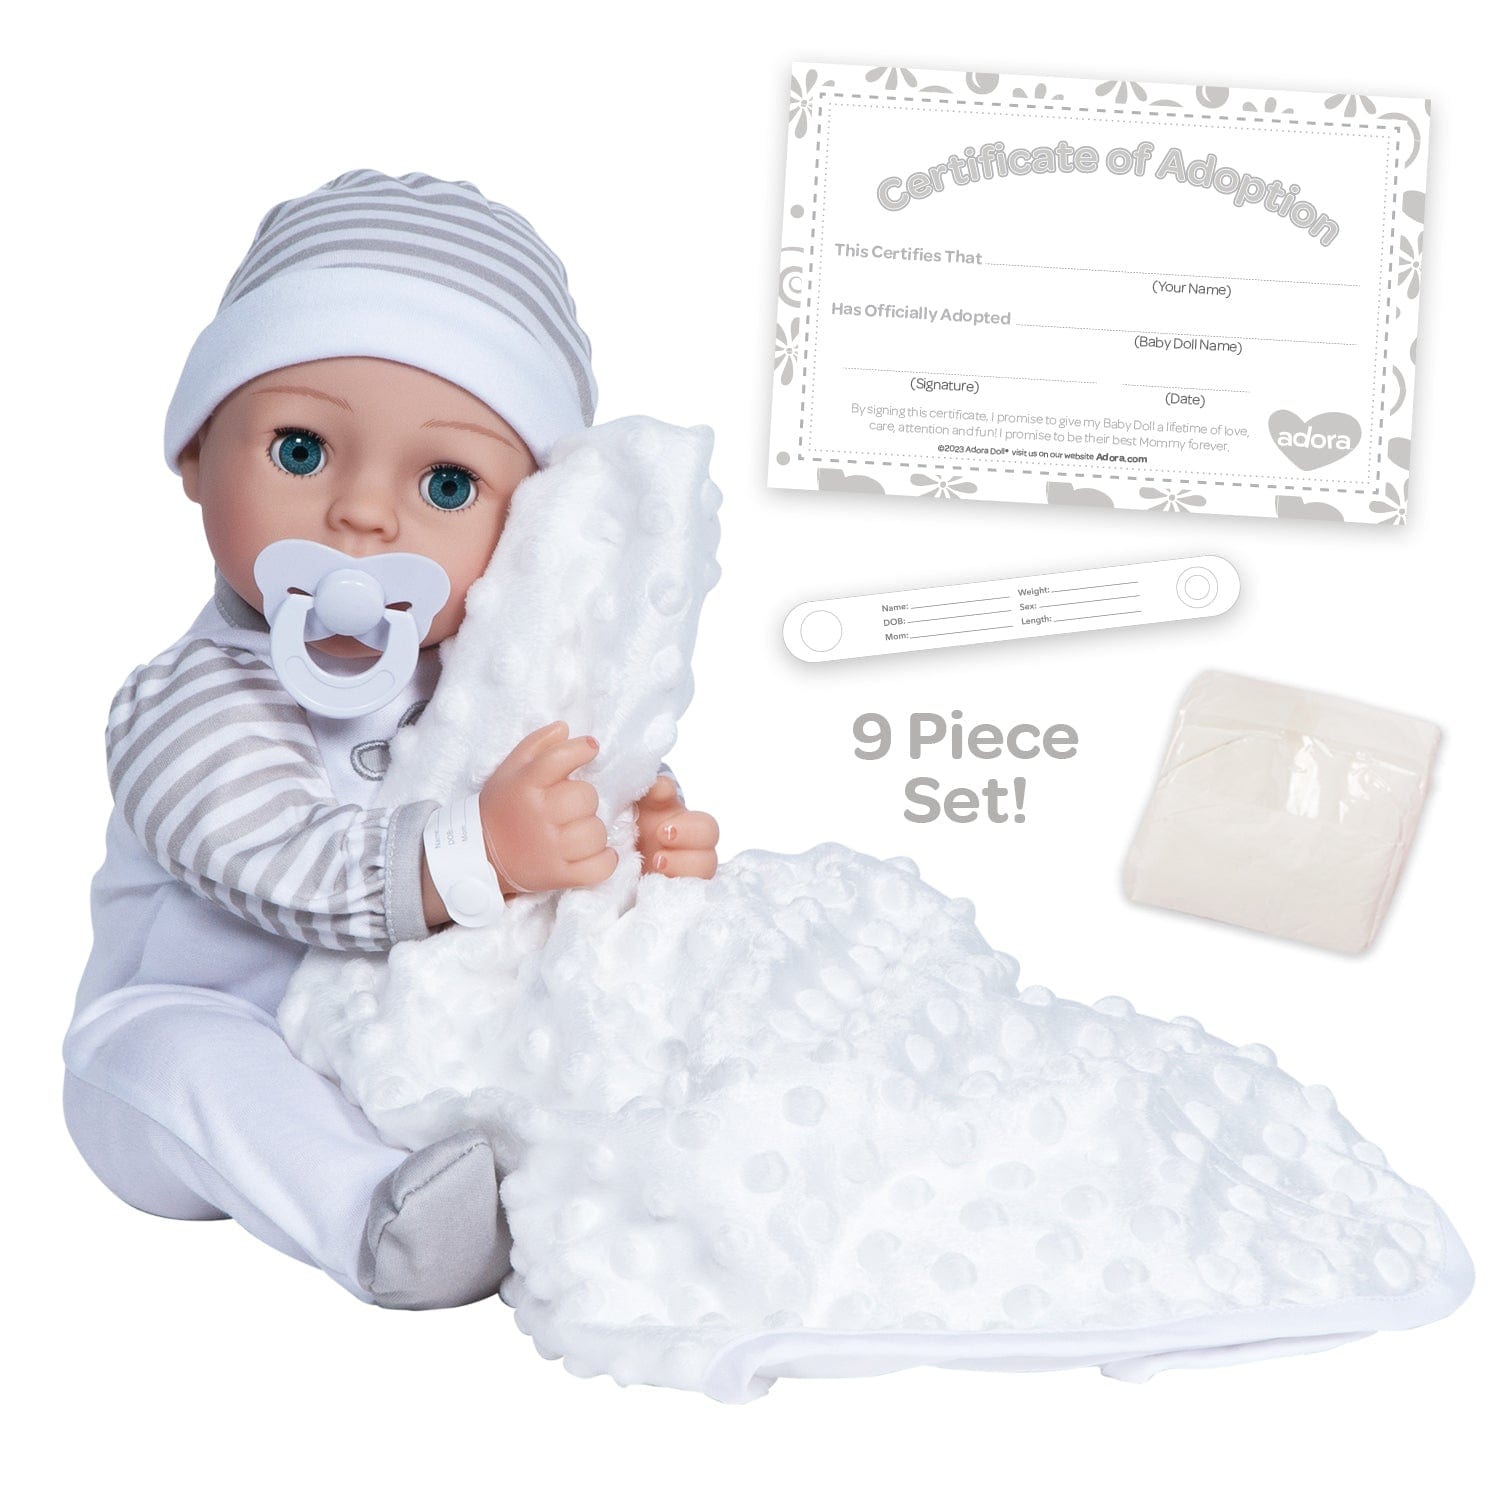 Gender-neutral baby doll set comes with one 16